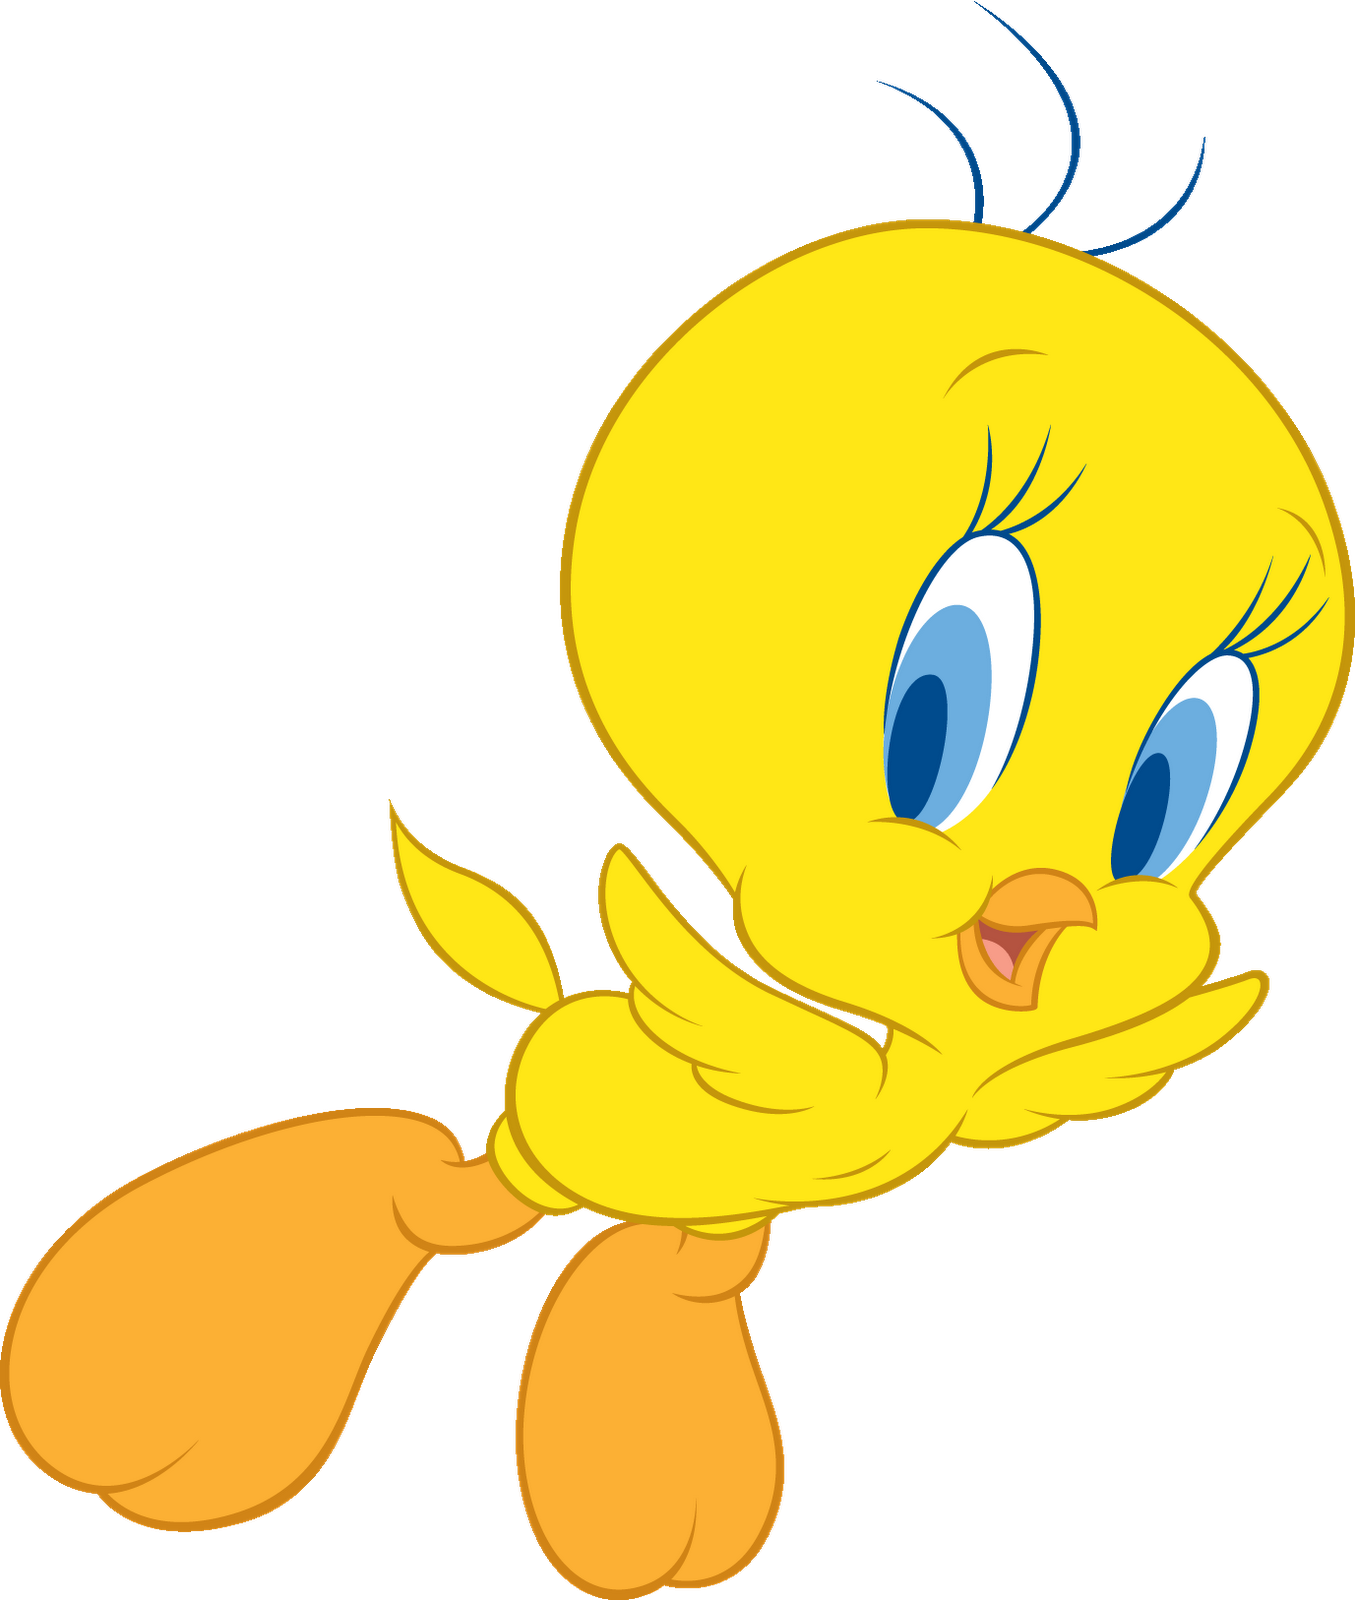 Tweety Bird Clip Art Animations - Free Clipart Images